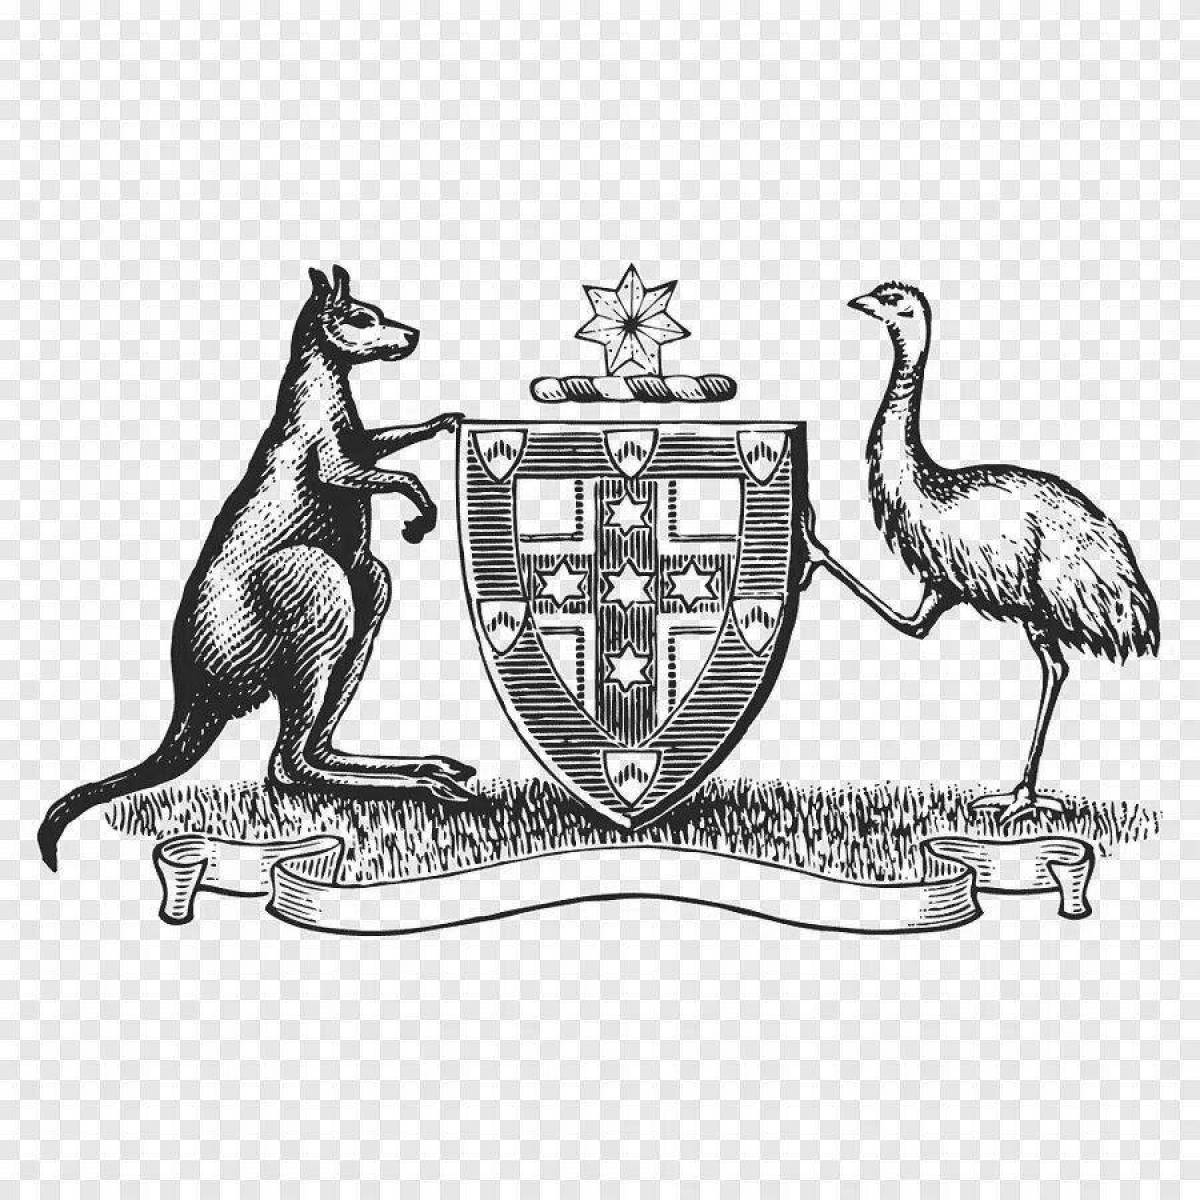 Australia shiny coat of arms coloring page